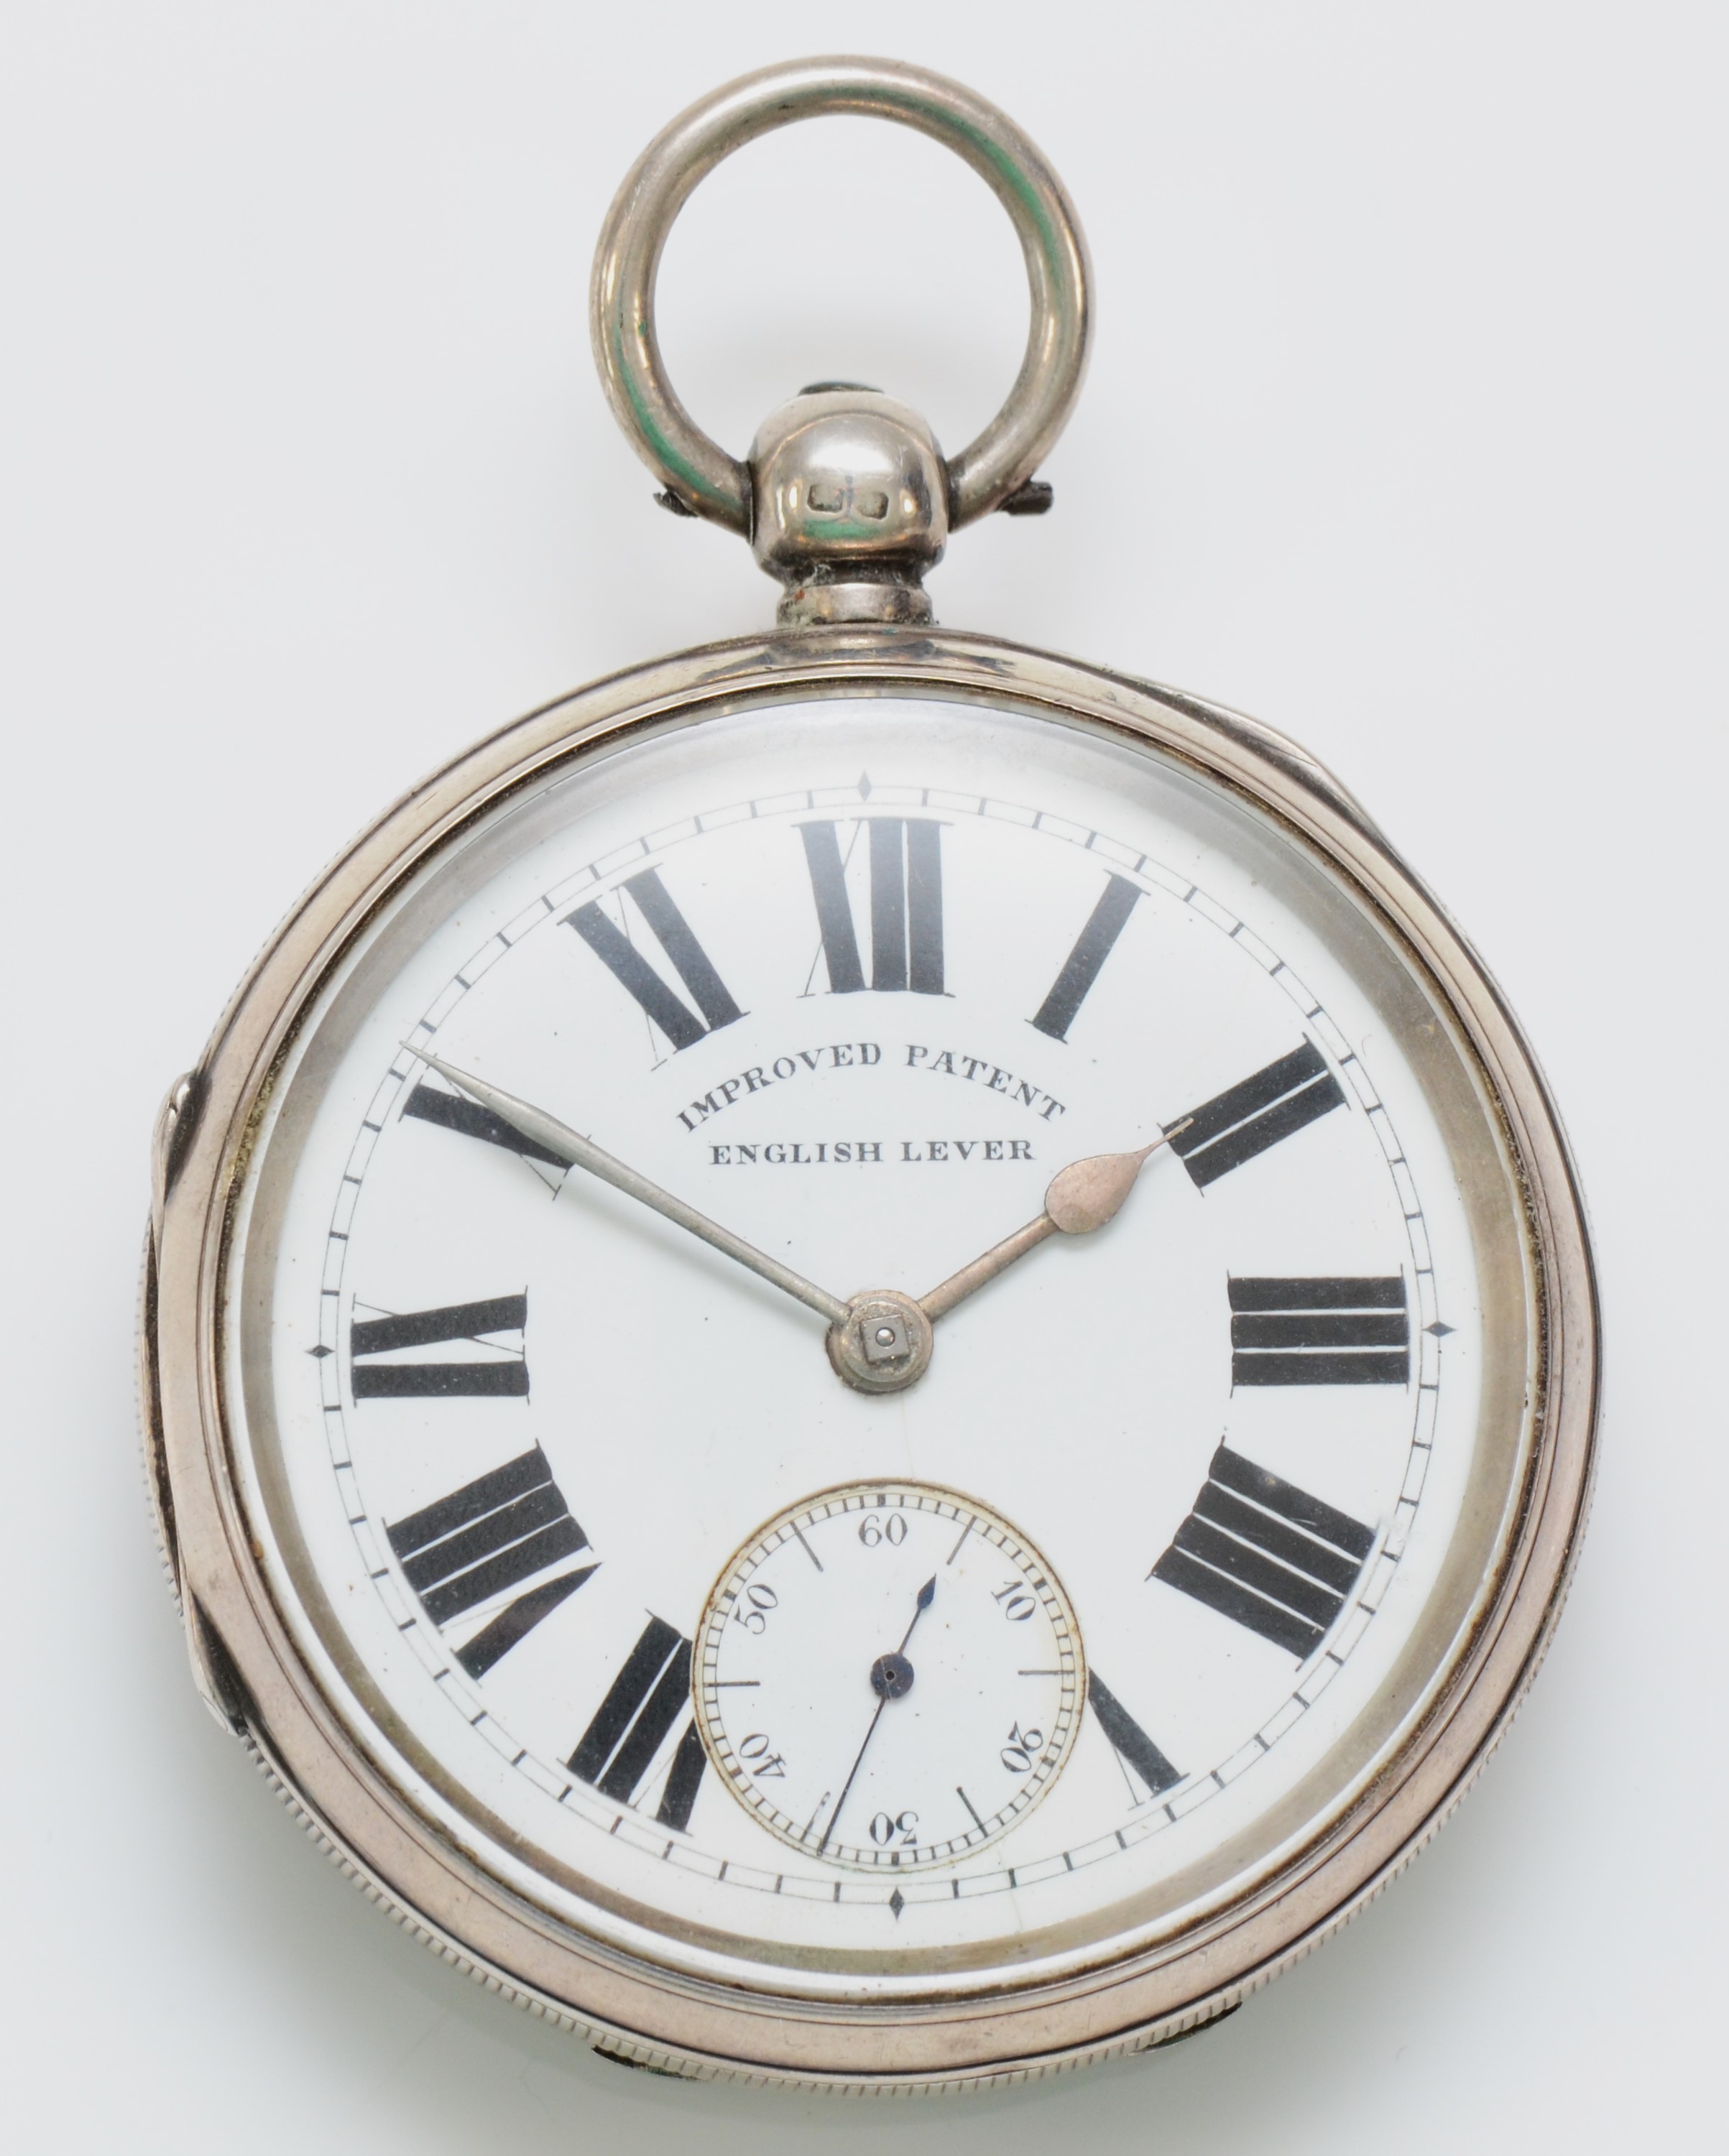 A silver key wind open face pocket watch, Chester 1899, Improved Patent English Lever, 54mm, working